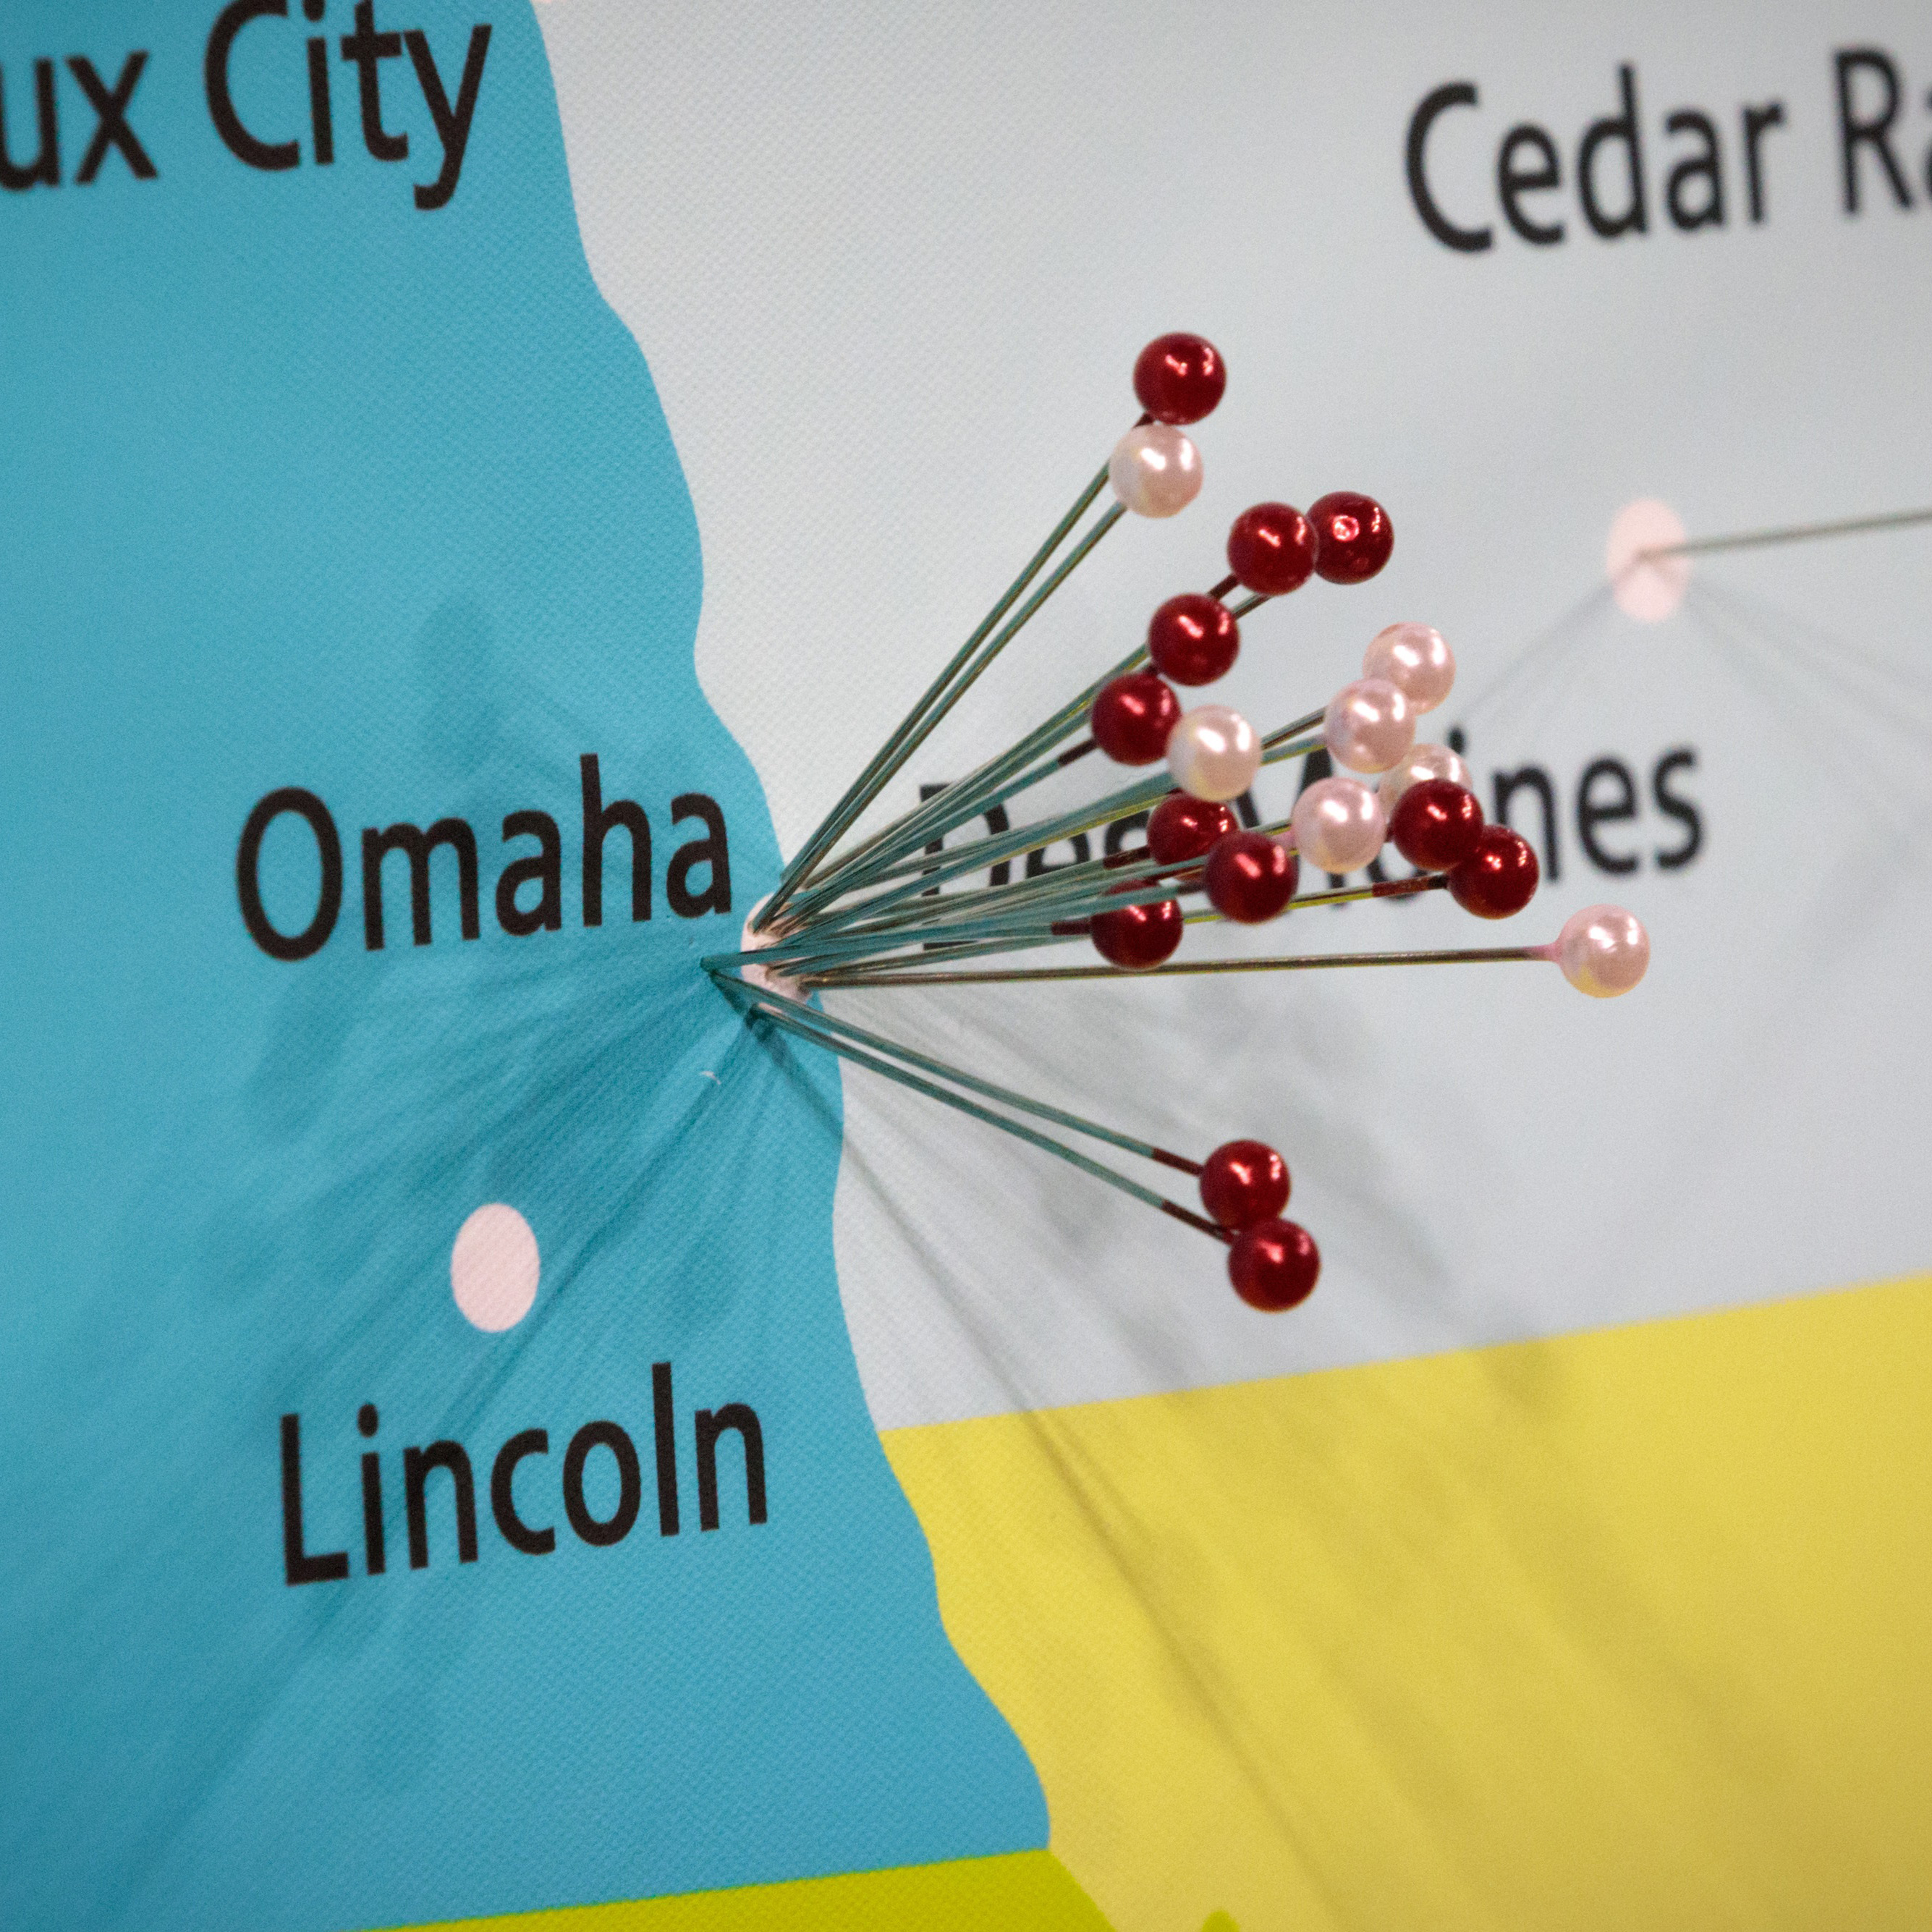 Omaha on the map with pushpins